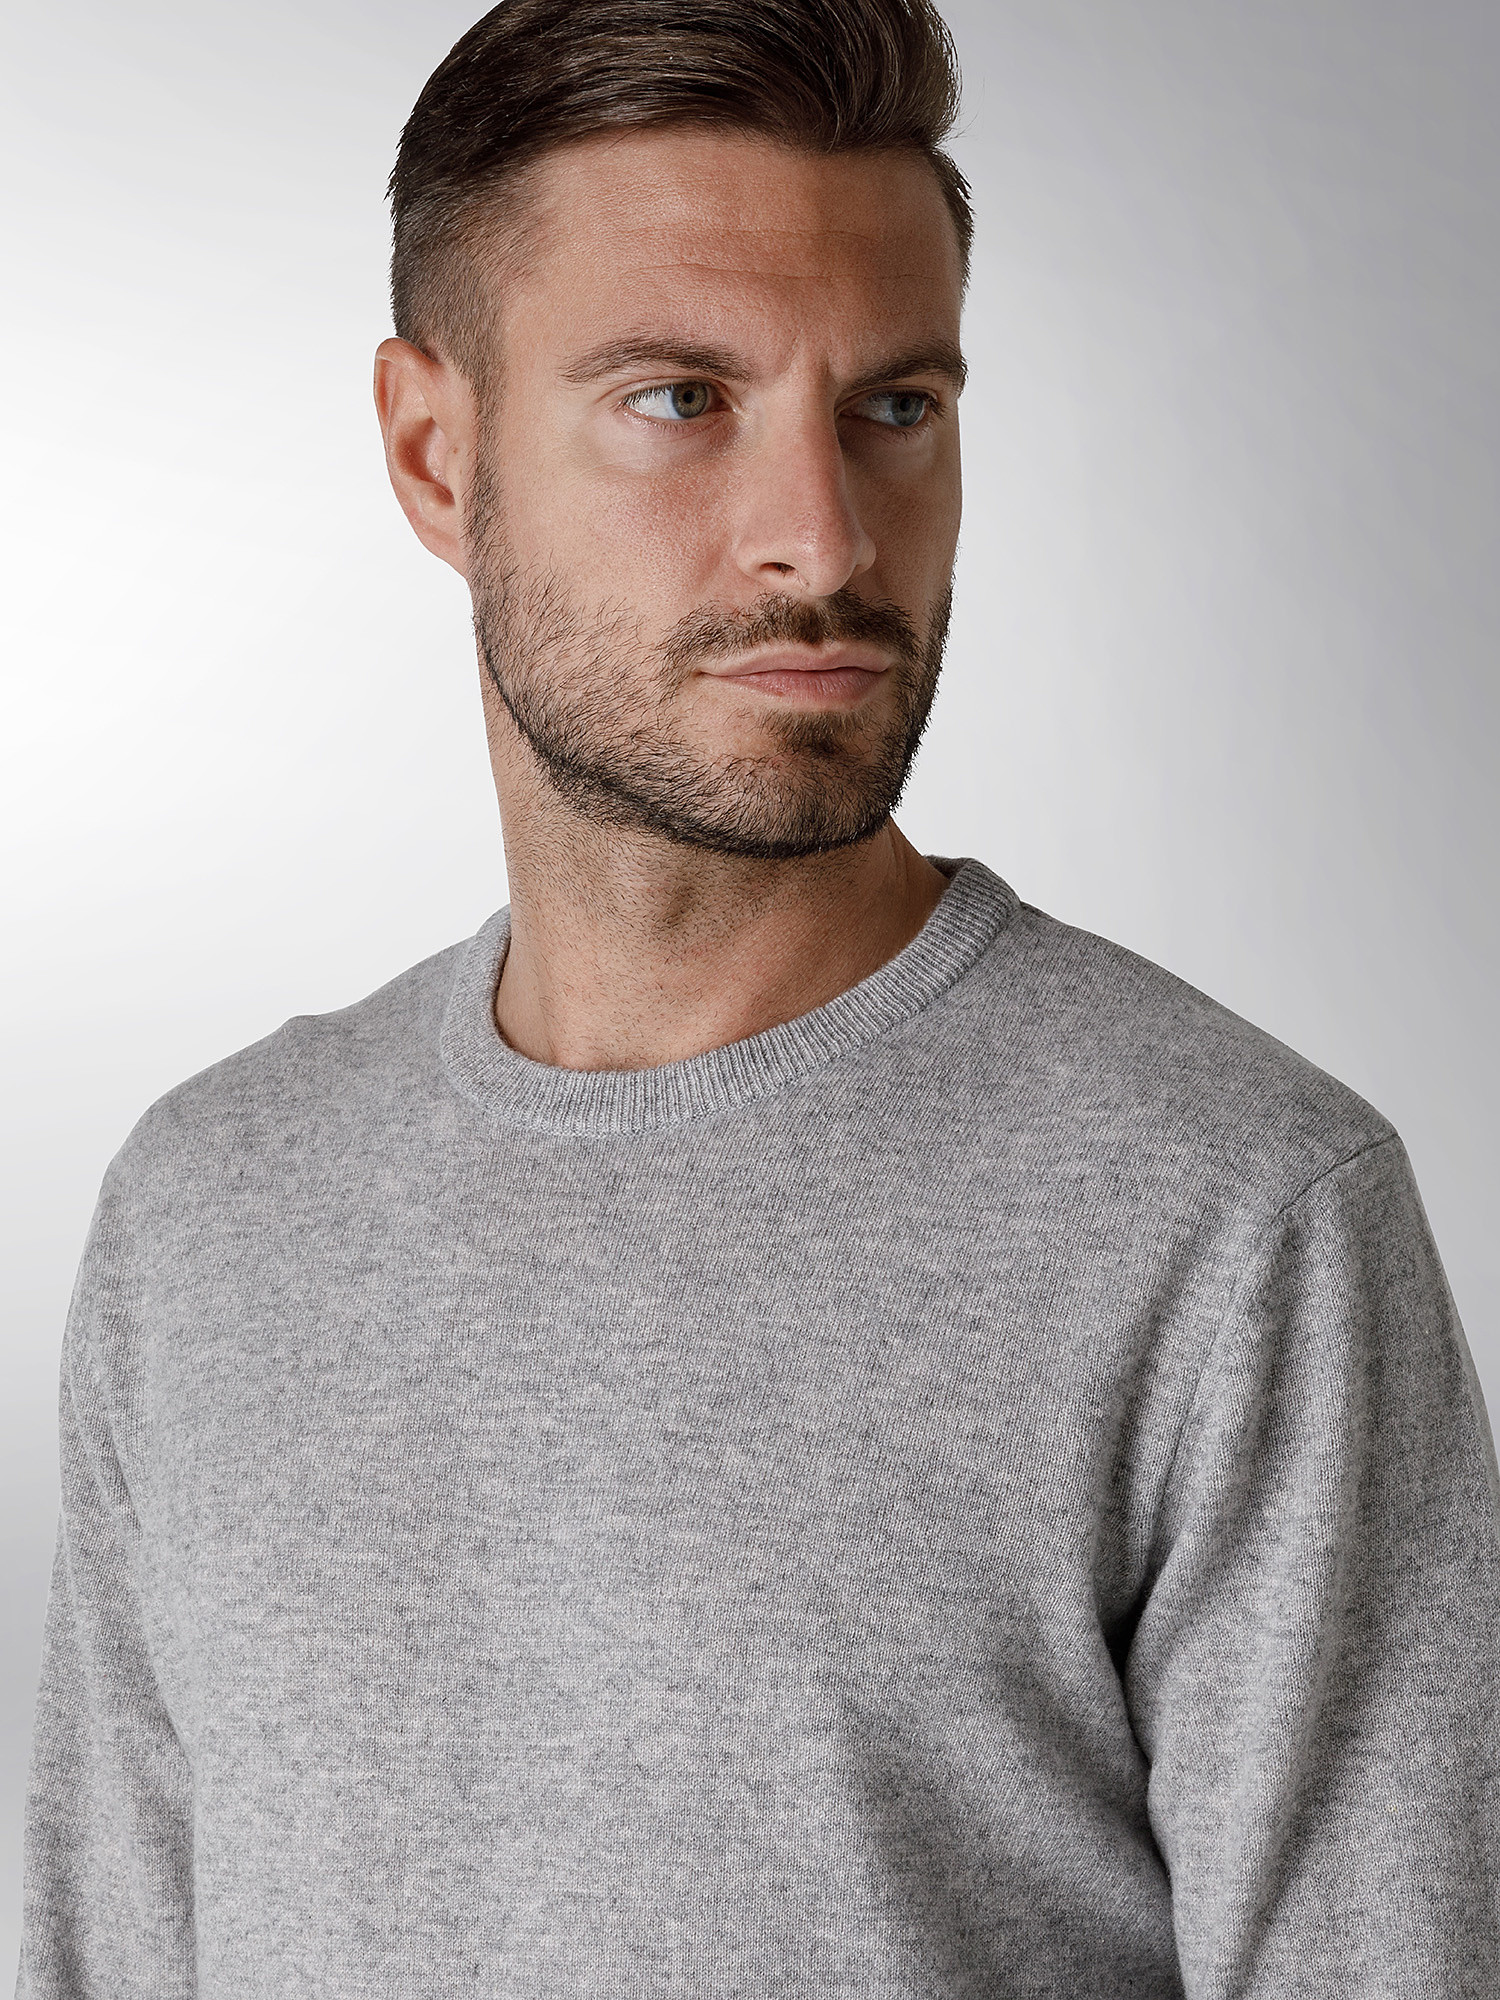 Coin Cashmere - Crewneck sweater in pure premium cashmere, Light Grey, large image number 3